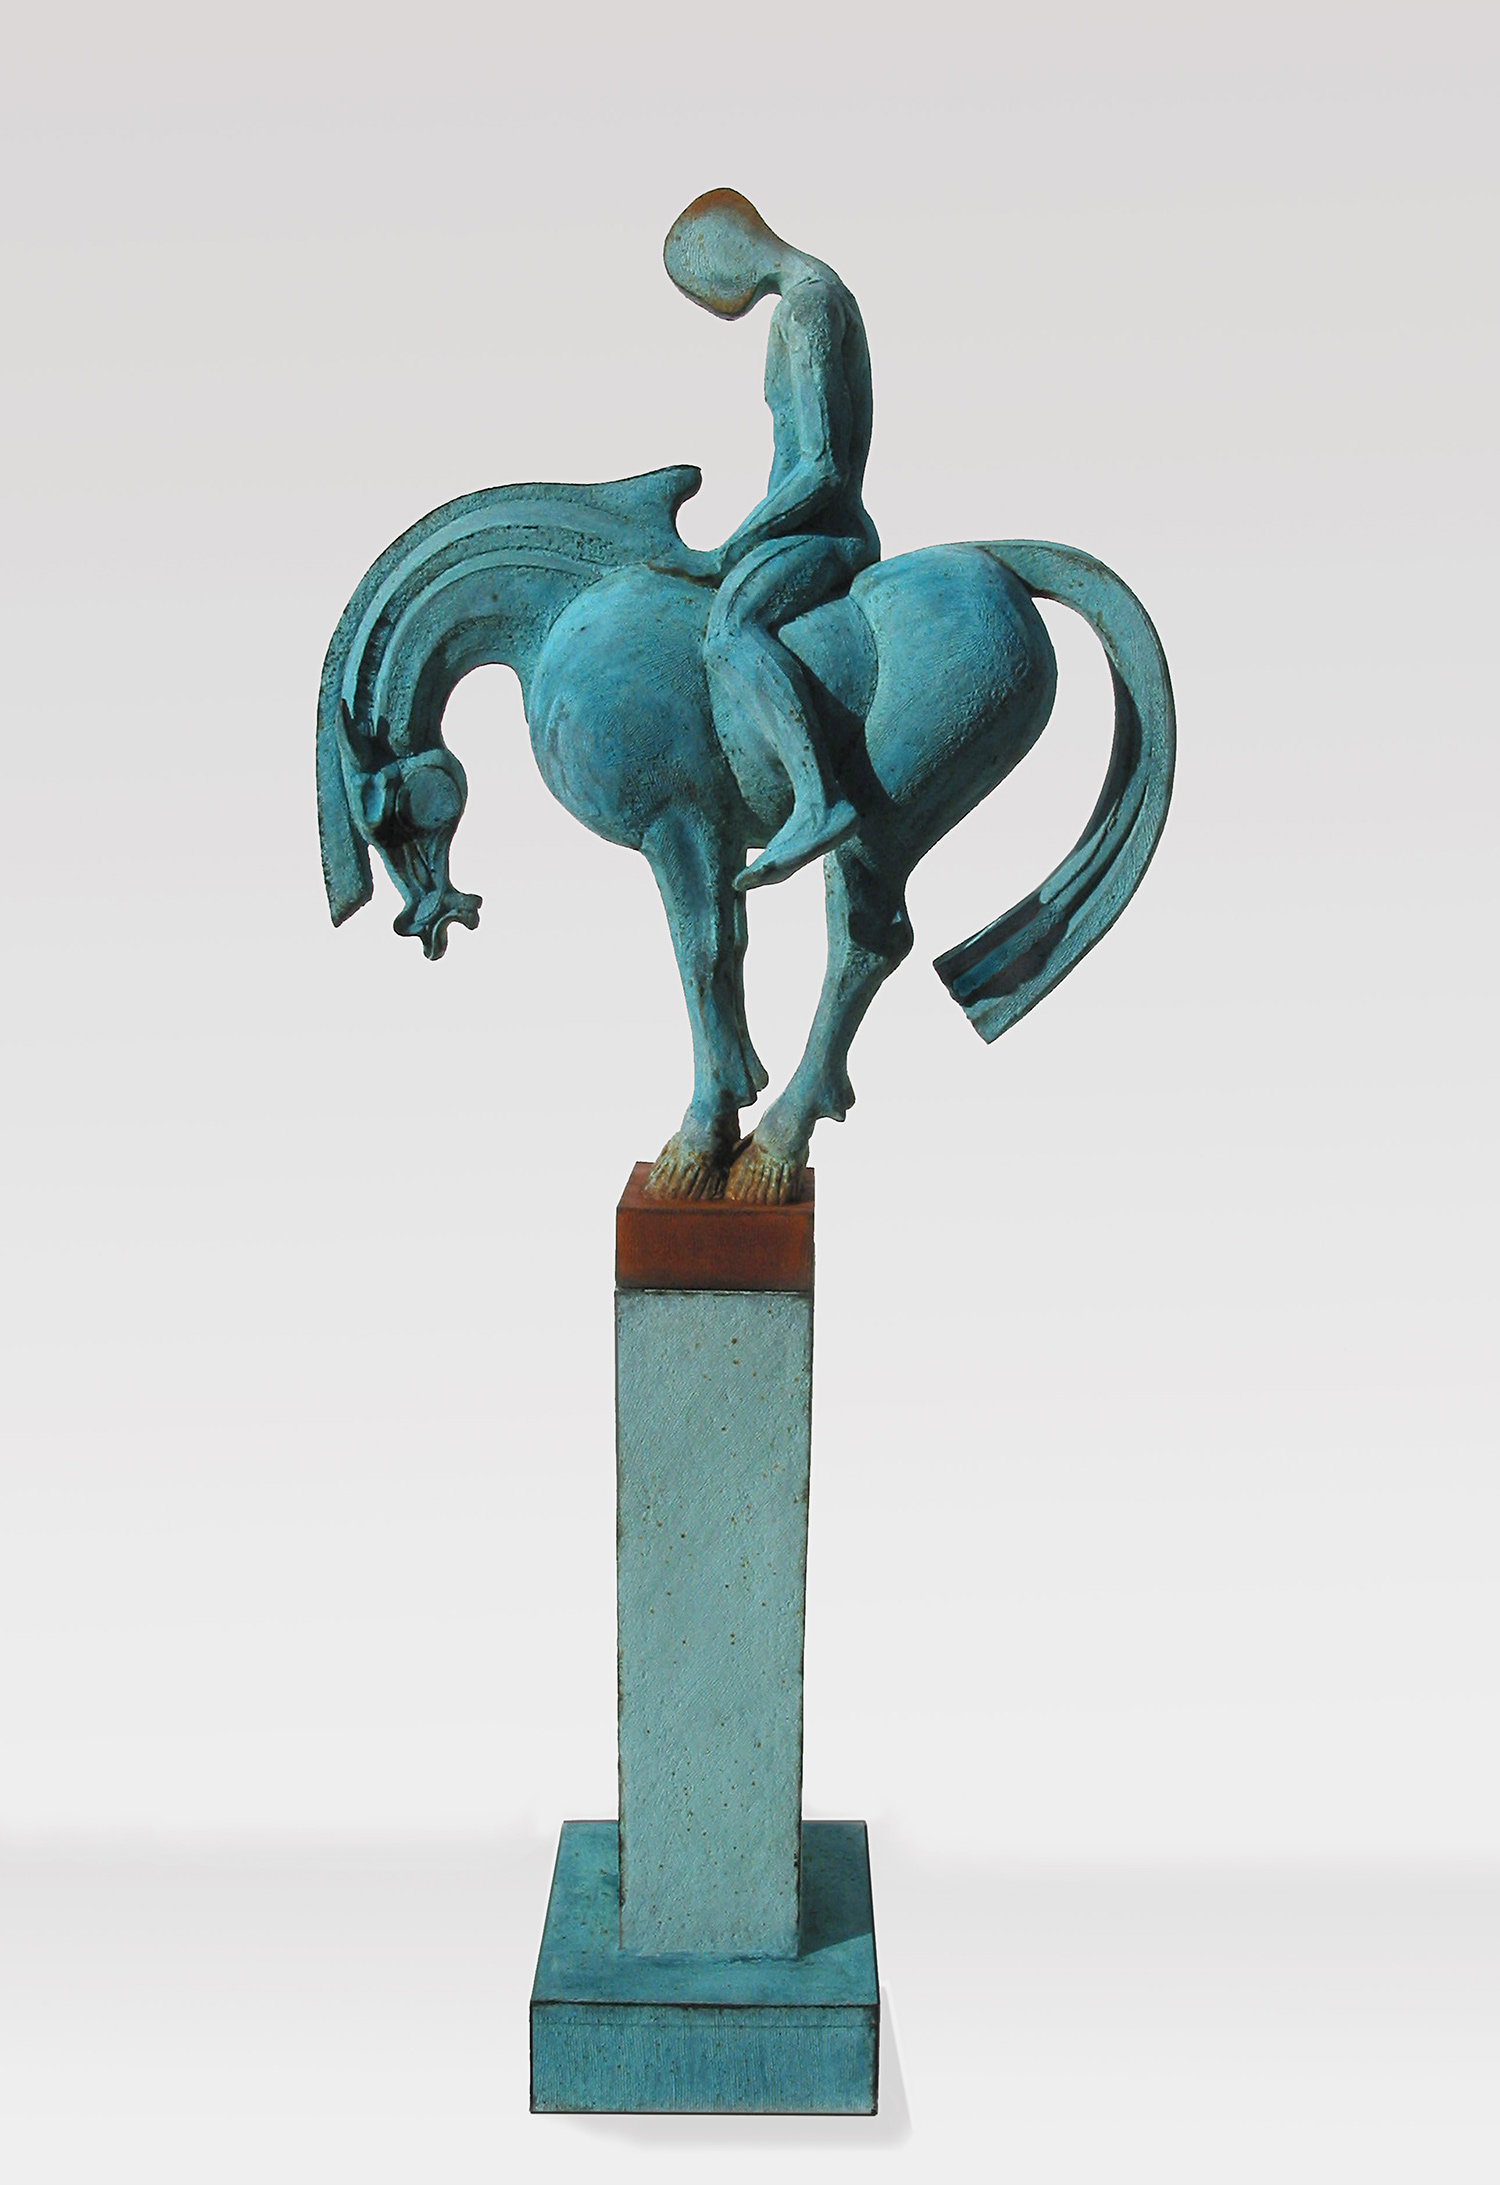  Tang Blue &nbsp; ©  118 cm high x 51 cm wide  Unique  Diamantopoulo has taken the basic long-necked Tang Horse form and counter-balanced it, more or less exactly, with an atypical extended tail so that it stands precariously like a vase on a plinth 